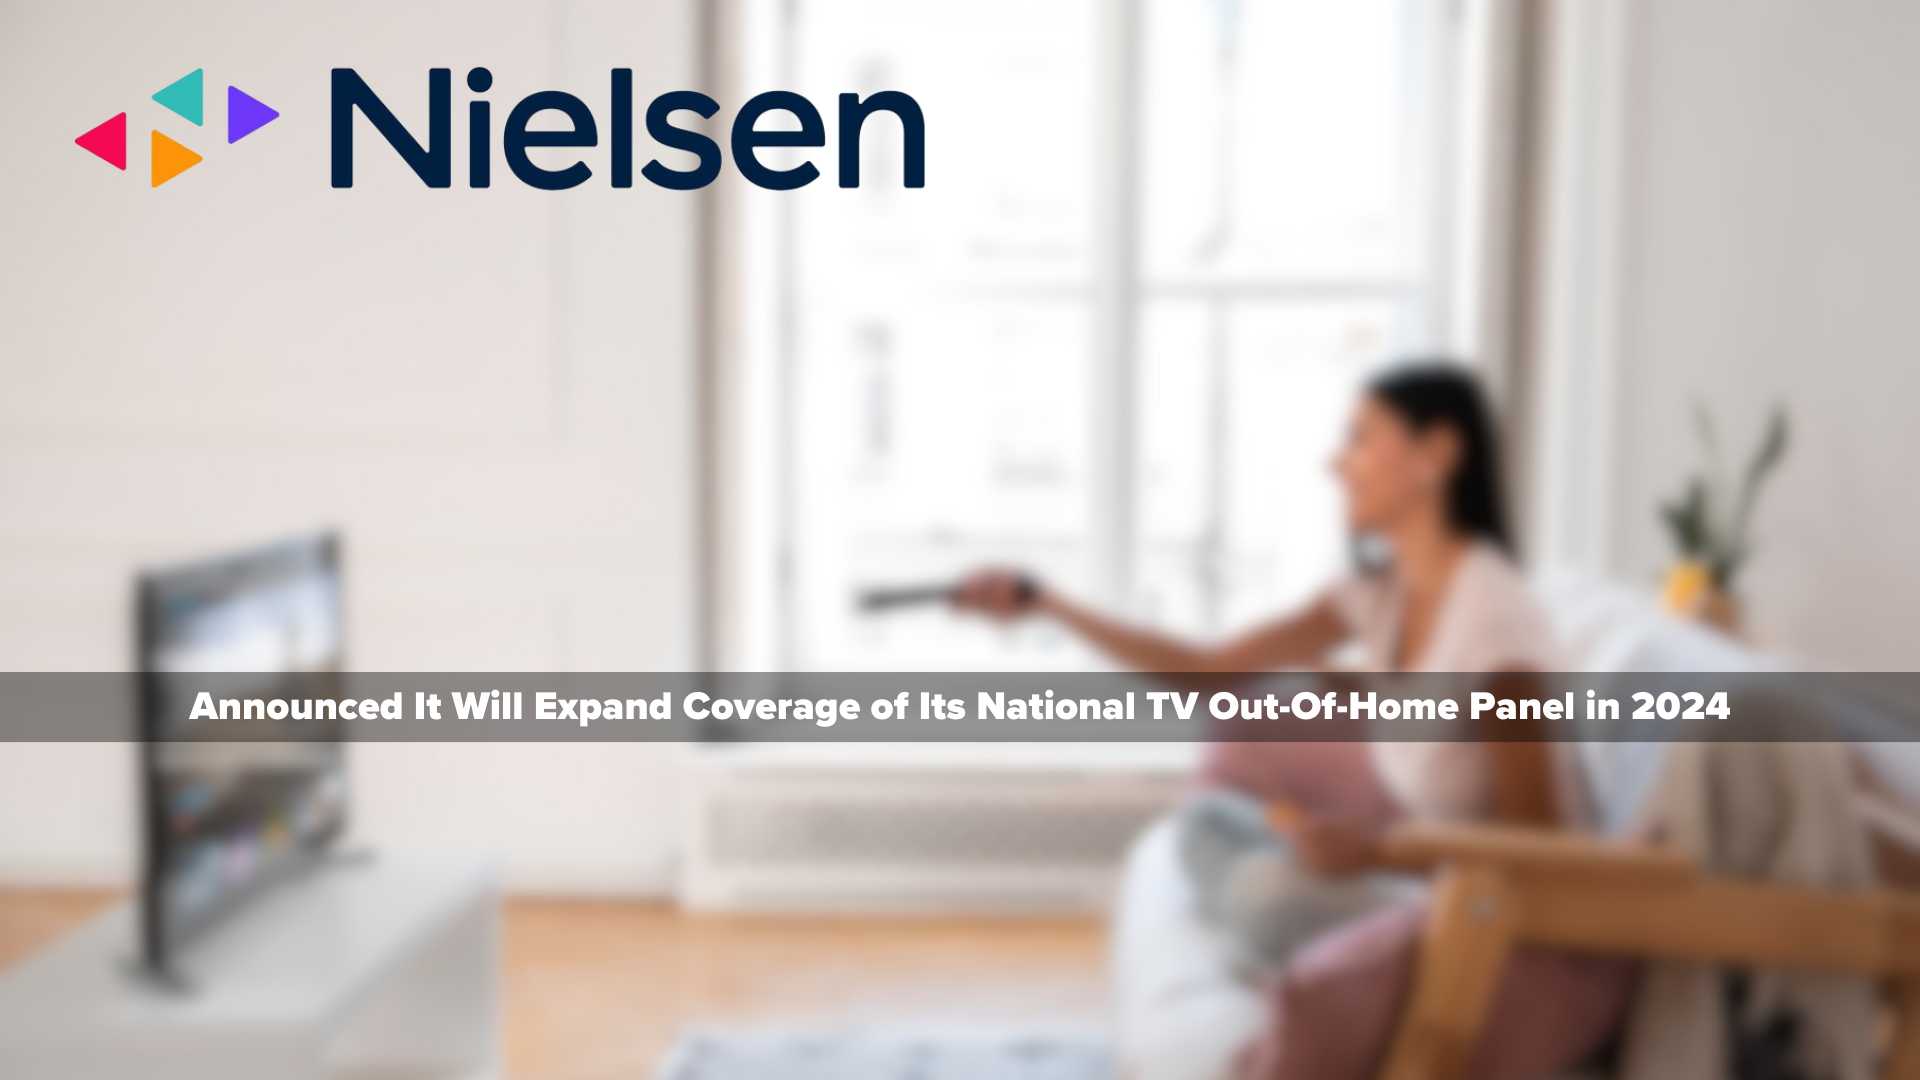 NIELSEN EXPANDS NATIONAL OUT-OF-HOME PANEL, BRINGING COVERAGE TO 100%* OF U.S. TV HOUSEHOLDS